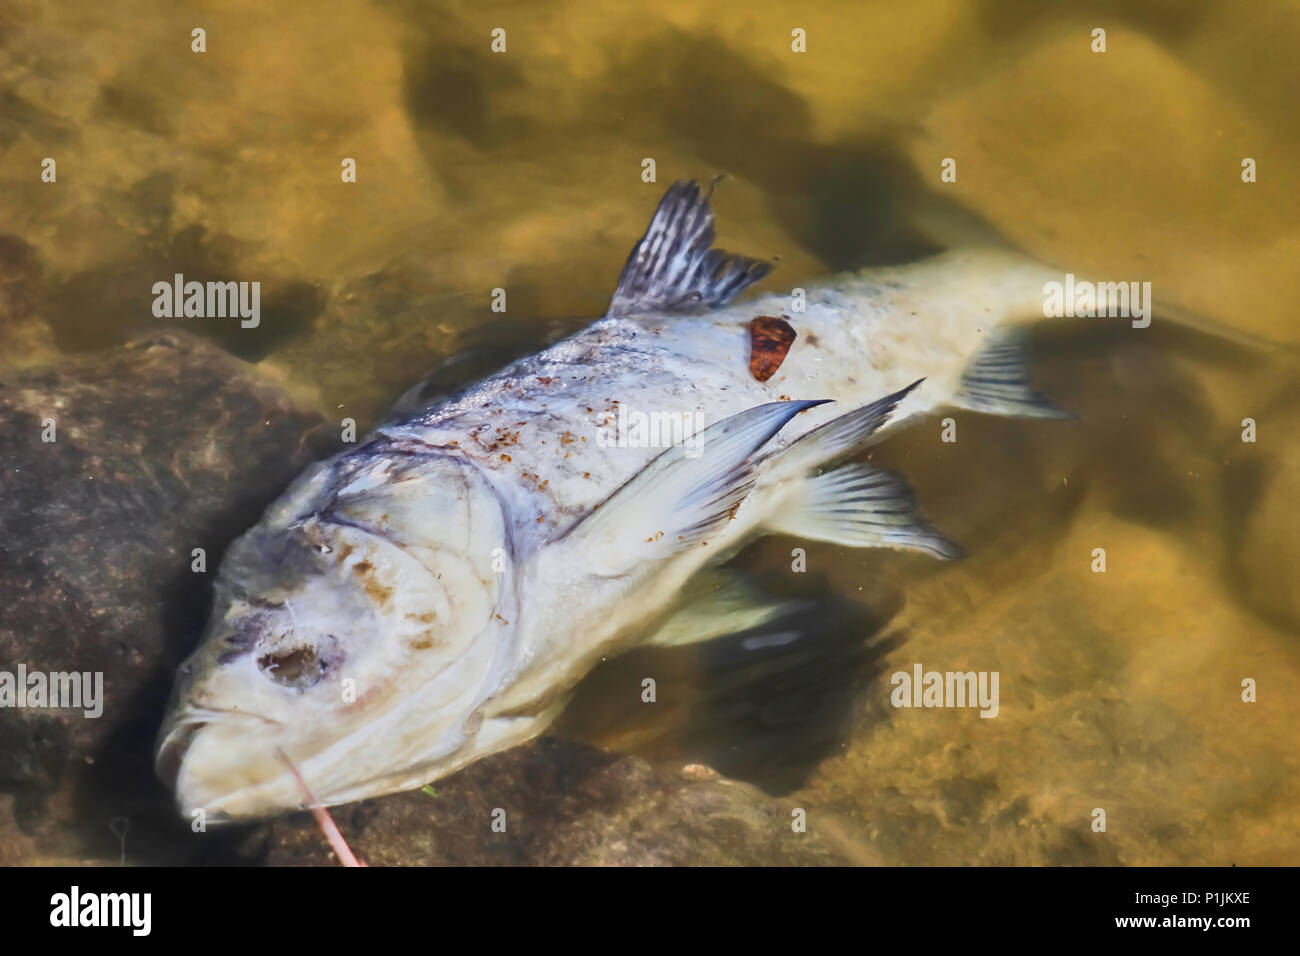 Dead fish Floating in polluted water Stock Photo